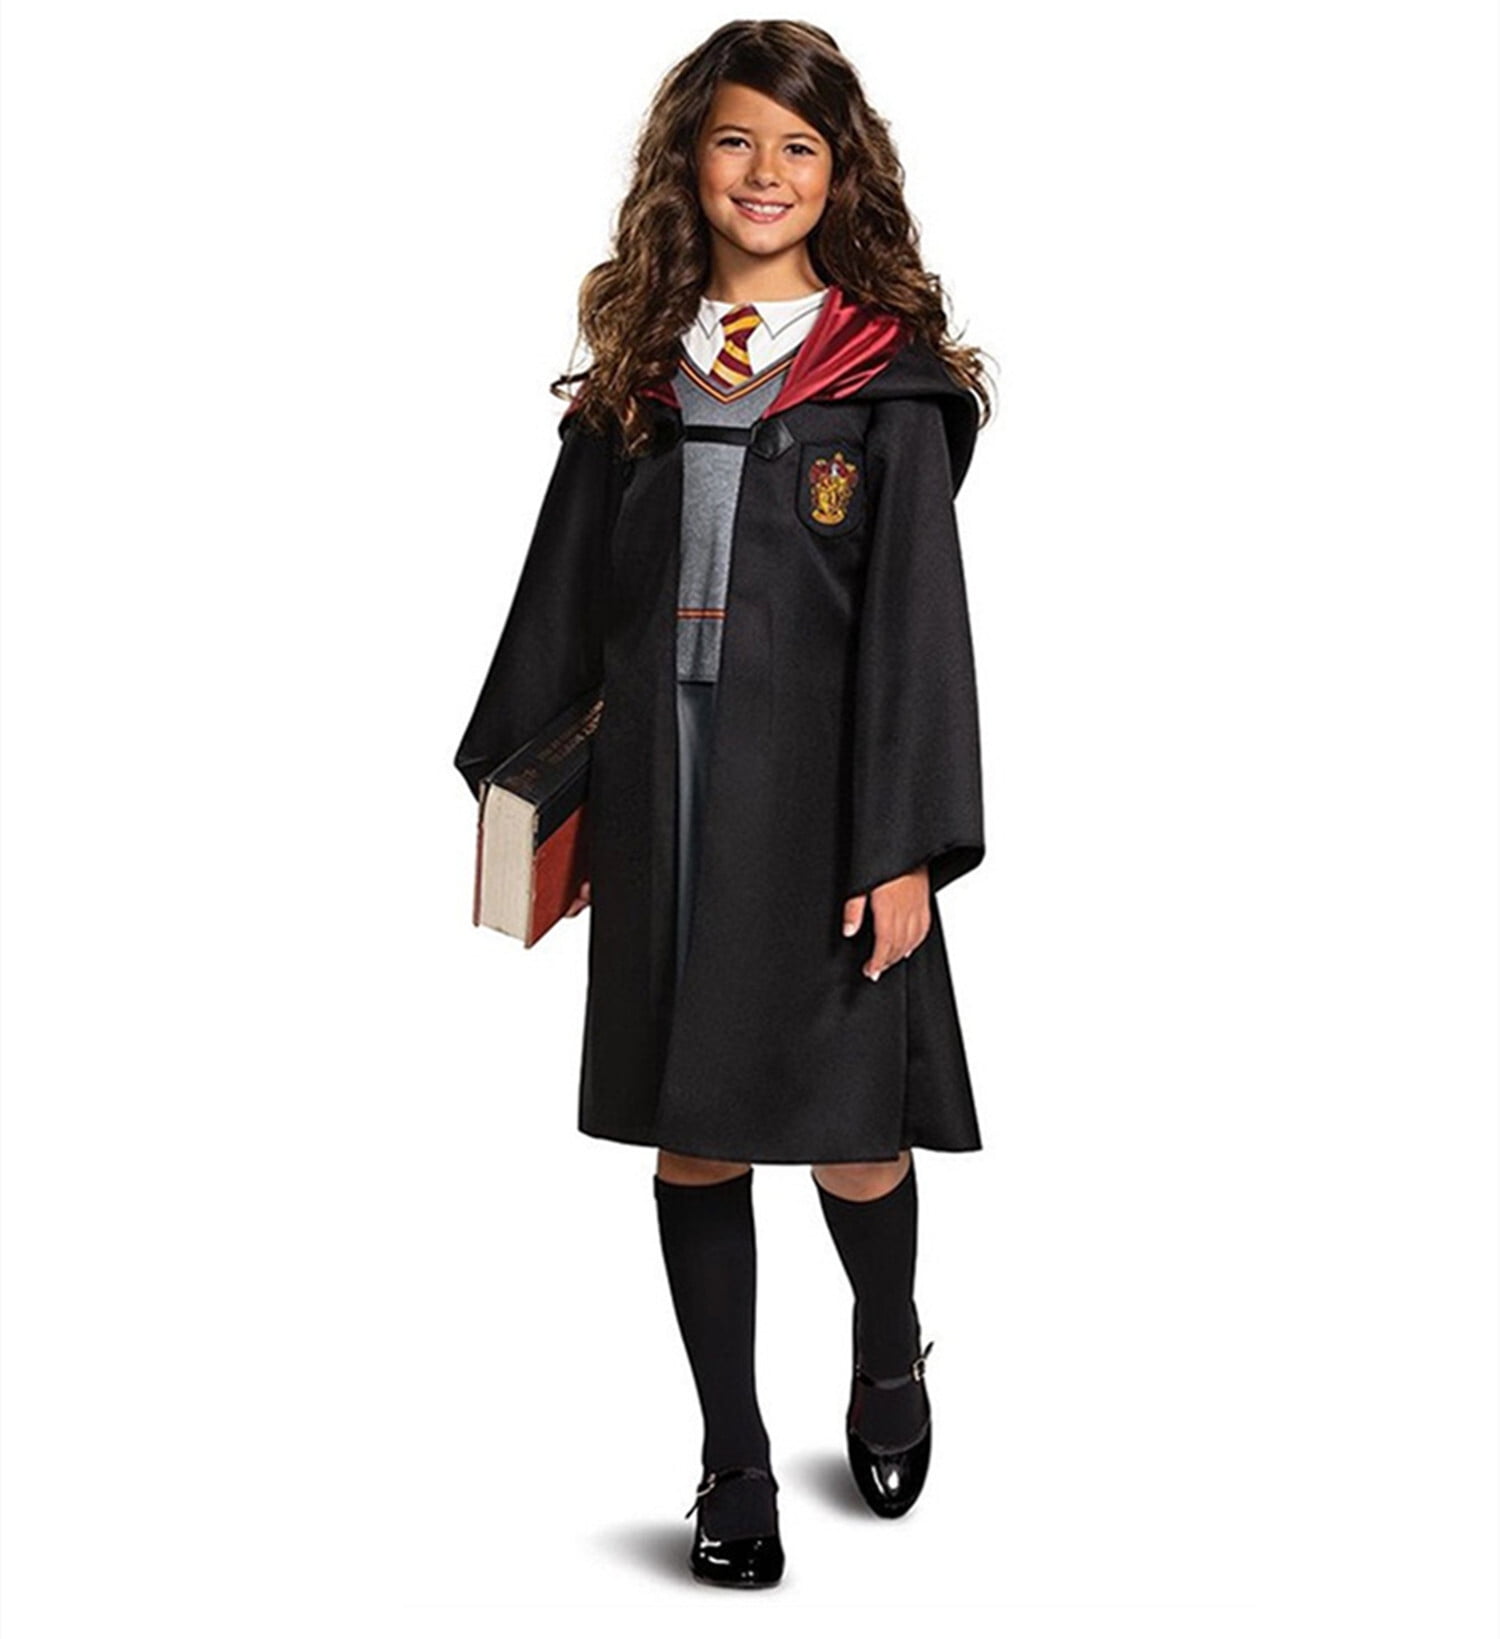 Harry Potter Costume Wizarding World Outfit for Girls Halloween Cosplay  Costumes 